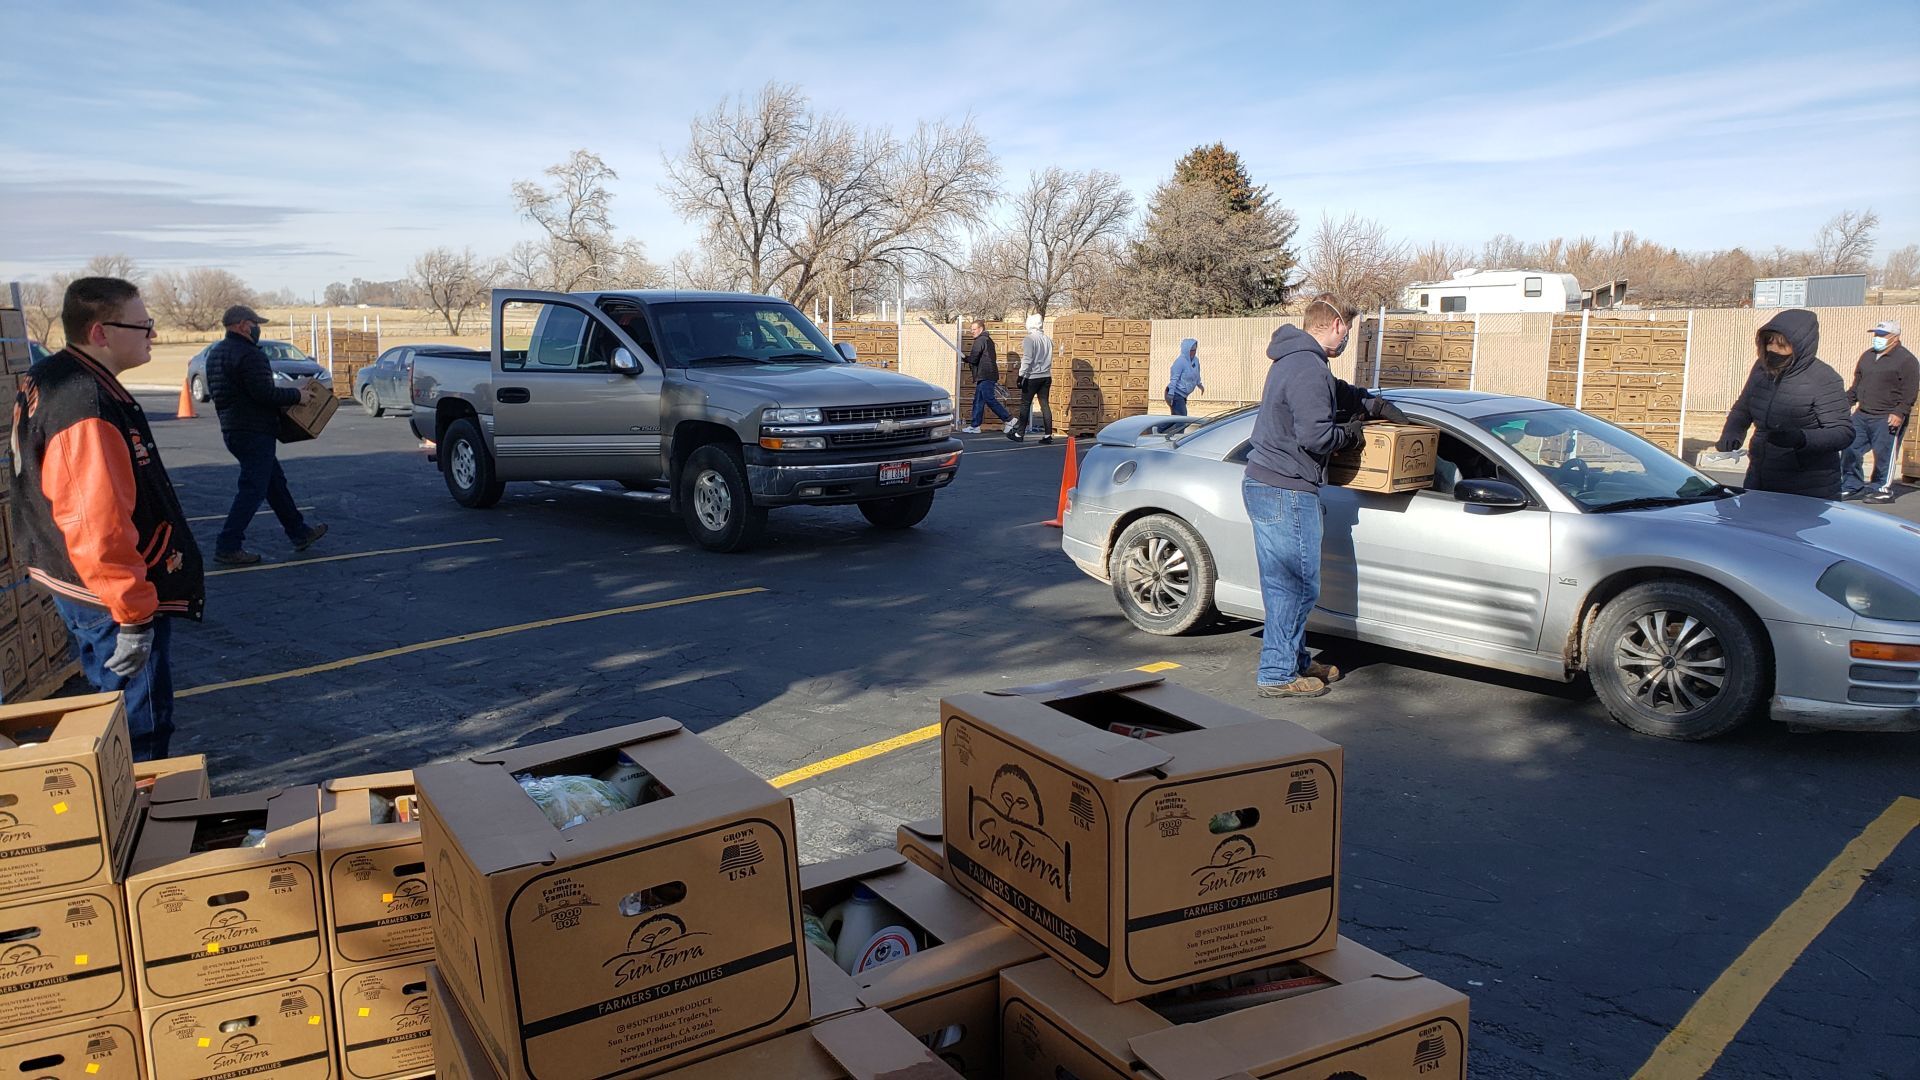 'One community': Local LDS church distributes nearly 40,000 pounds of food to Fort Hall residents